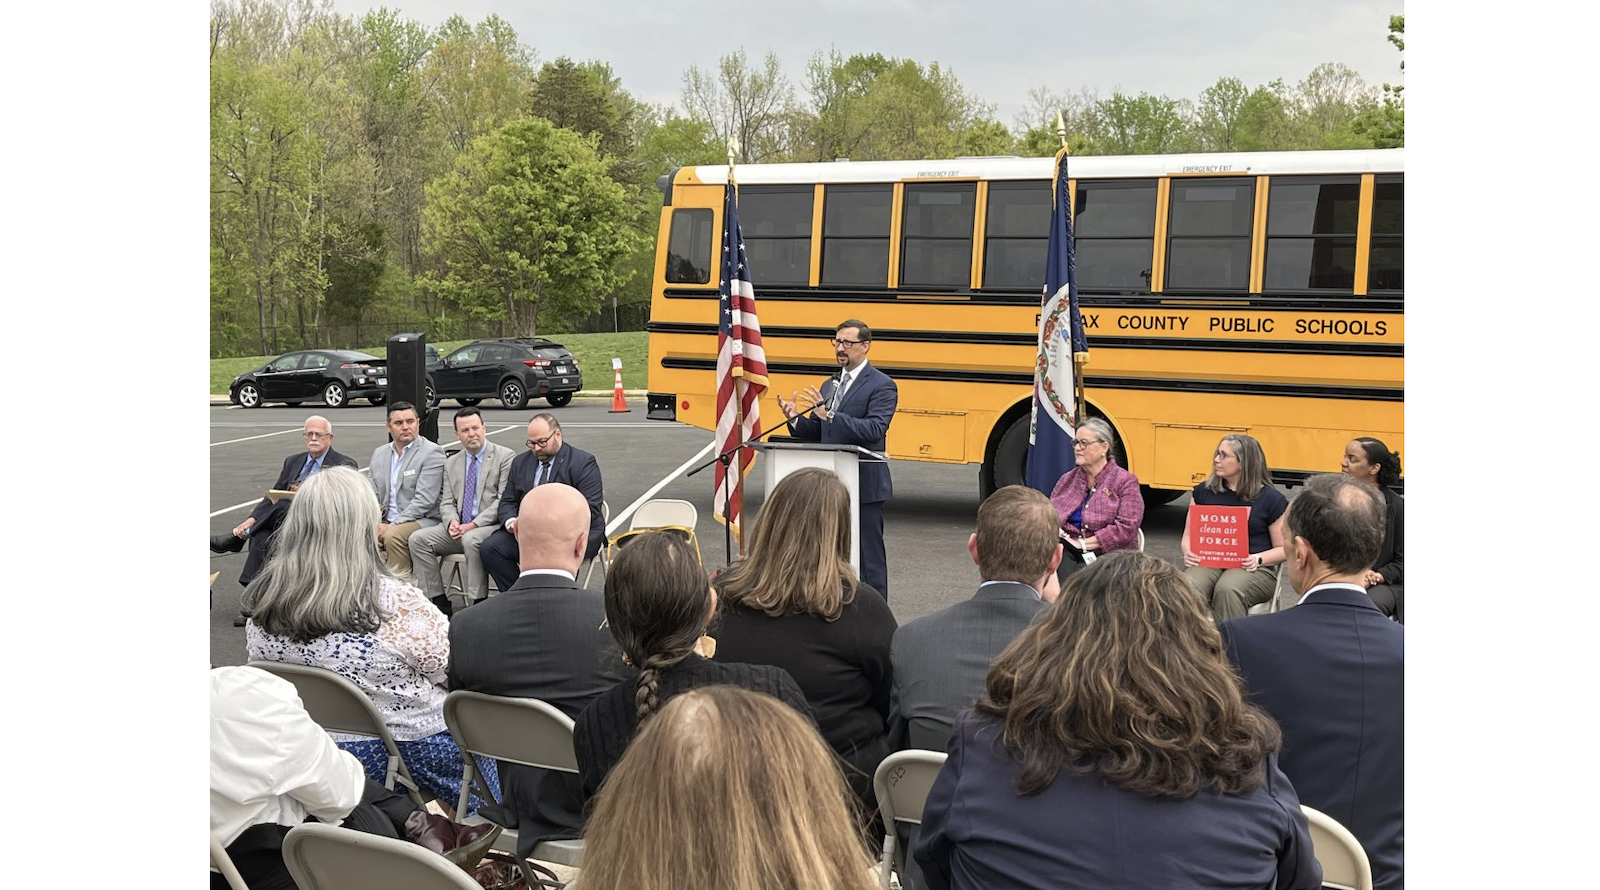 U.S. EPA Paves the Way for Clean Buses at Fairfax County Public Schools